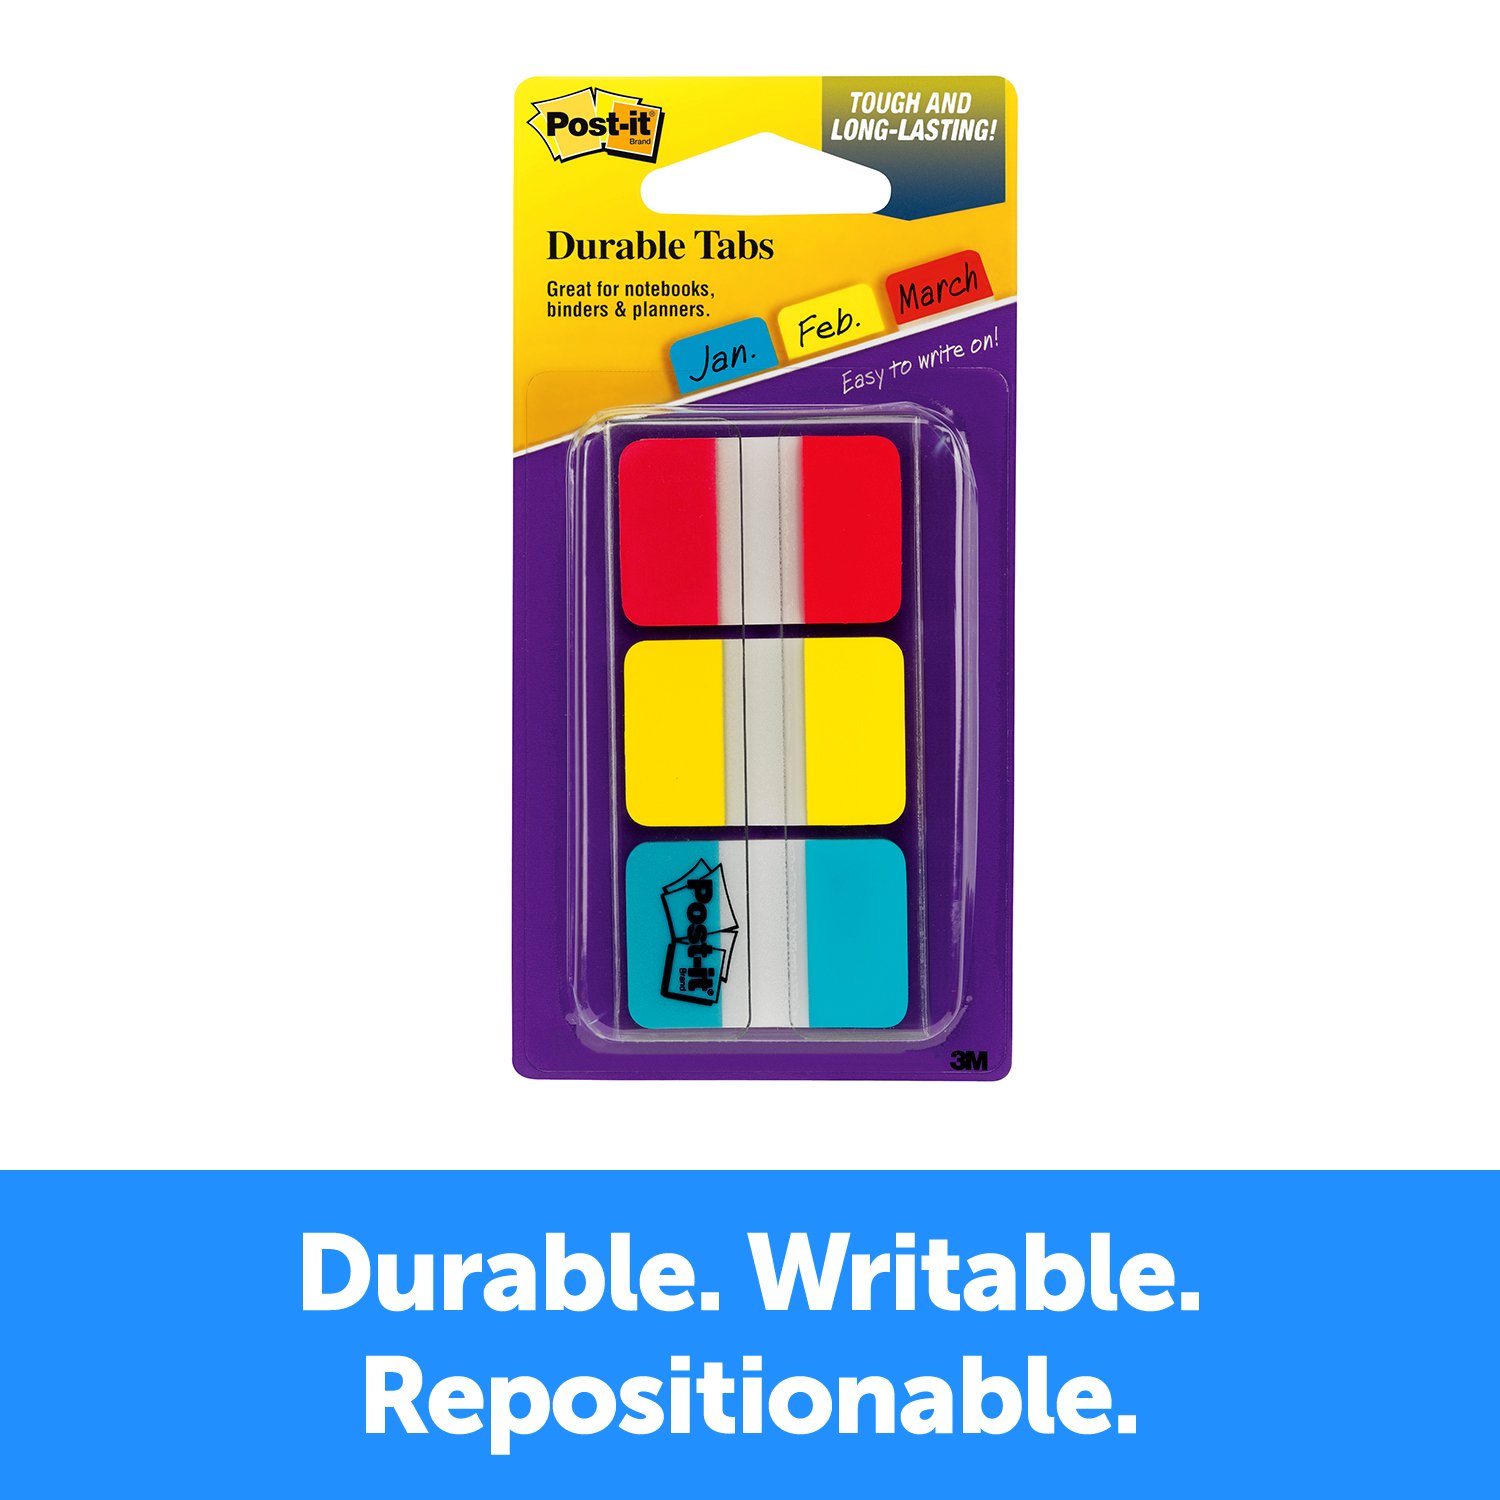 7010369233 - Post-it Durable Tabs 686-RYBT, 1 in x 1.5 in Red, Yellow, Blue 24
each/cs